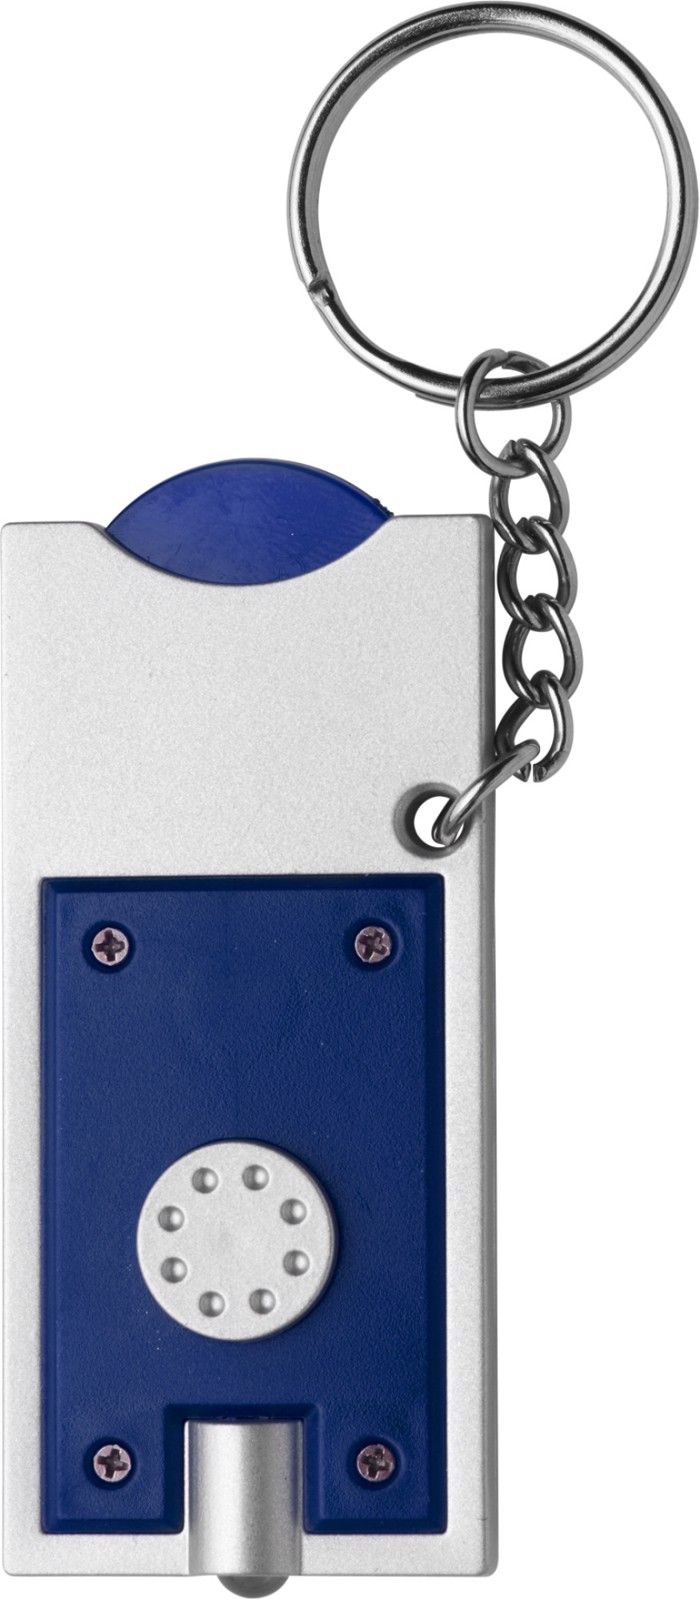 PS key holder with coin - Blue